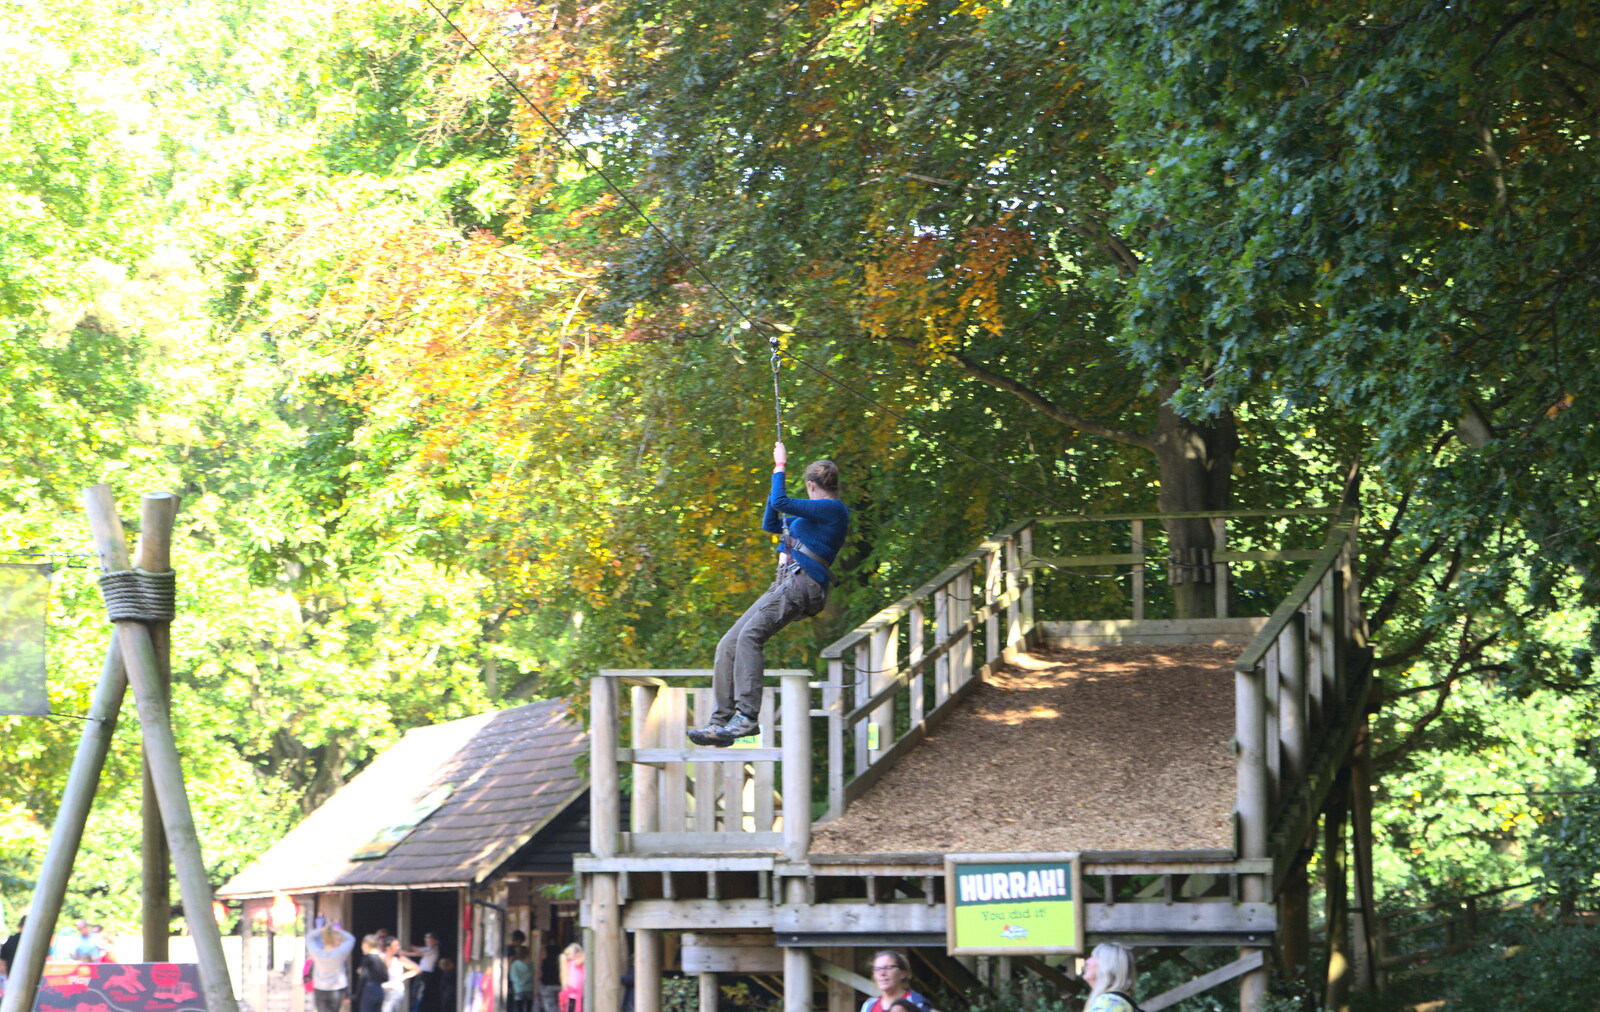 Isobel does the finale zip wire from Fred Goes Ape, High Lodge, Brandon, Suffolk - 24th September 2017